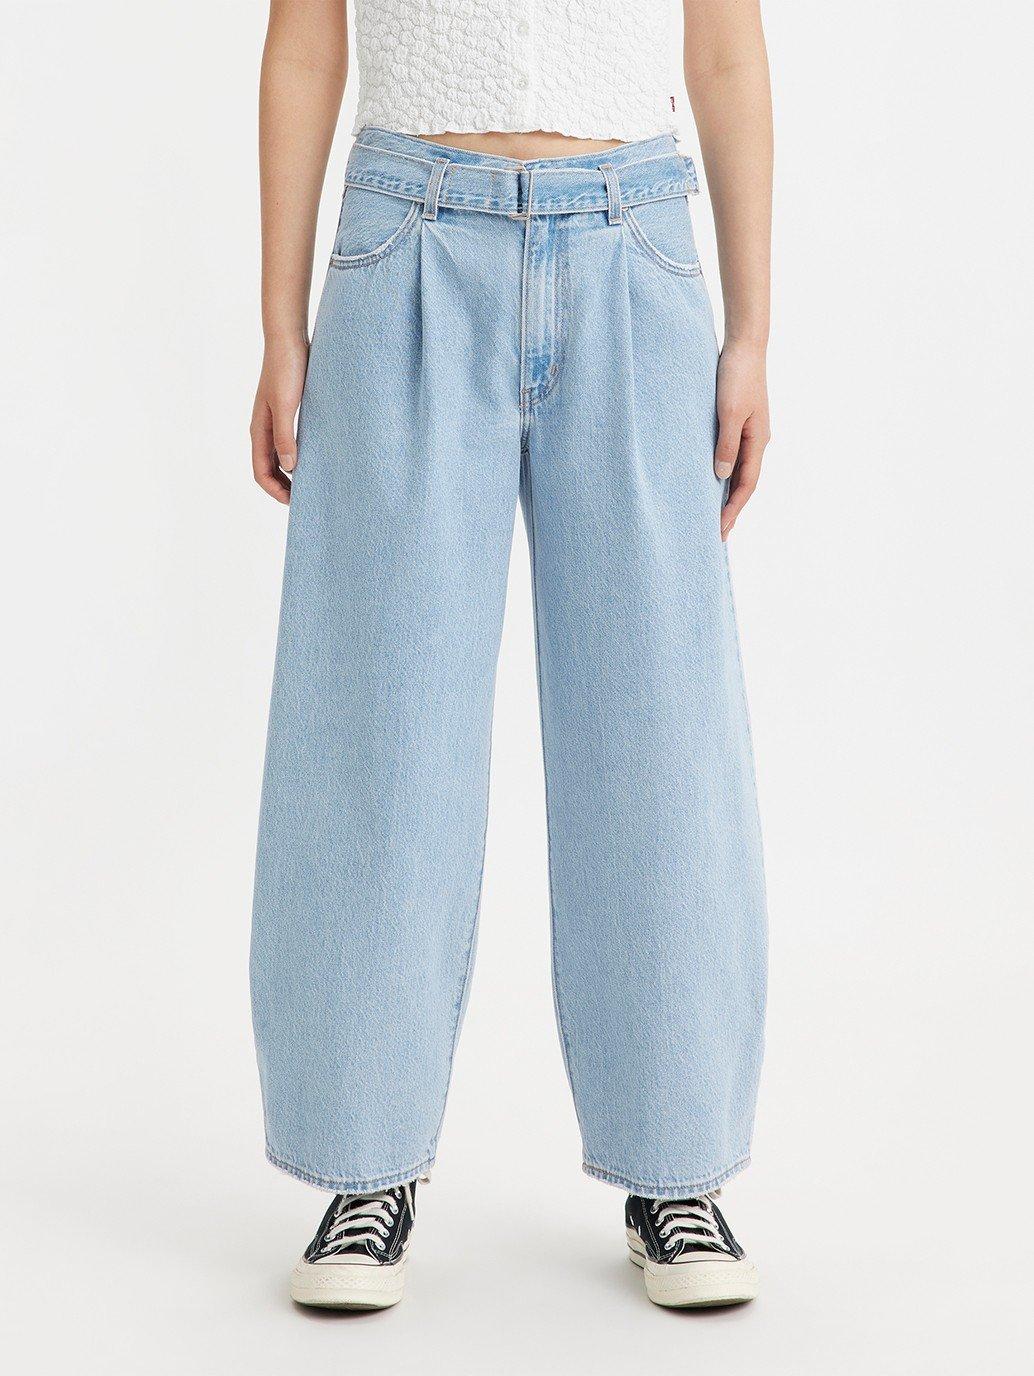 Buy Levi's® Women's Belted Baggy Jean | Levi’s® Official Online Store PH